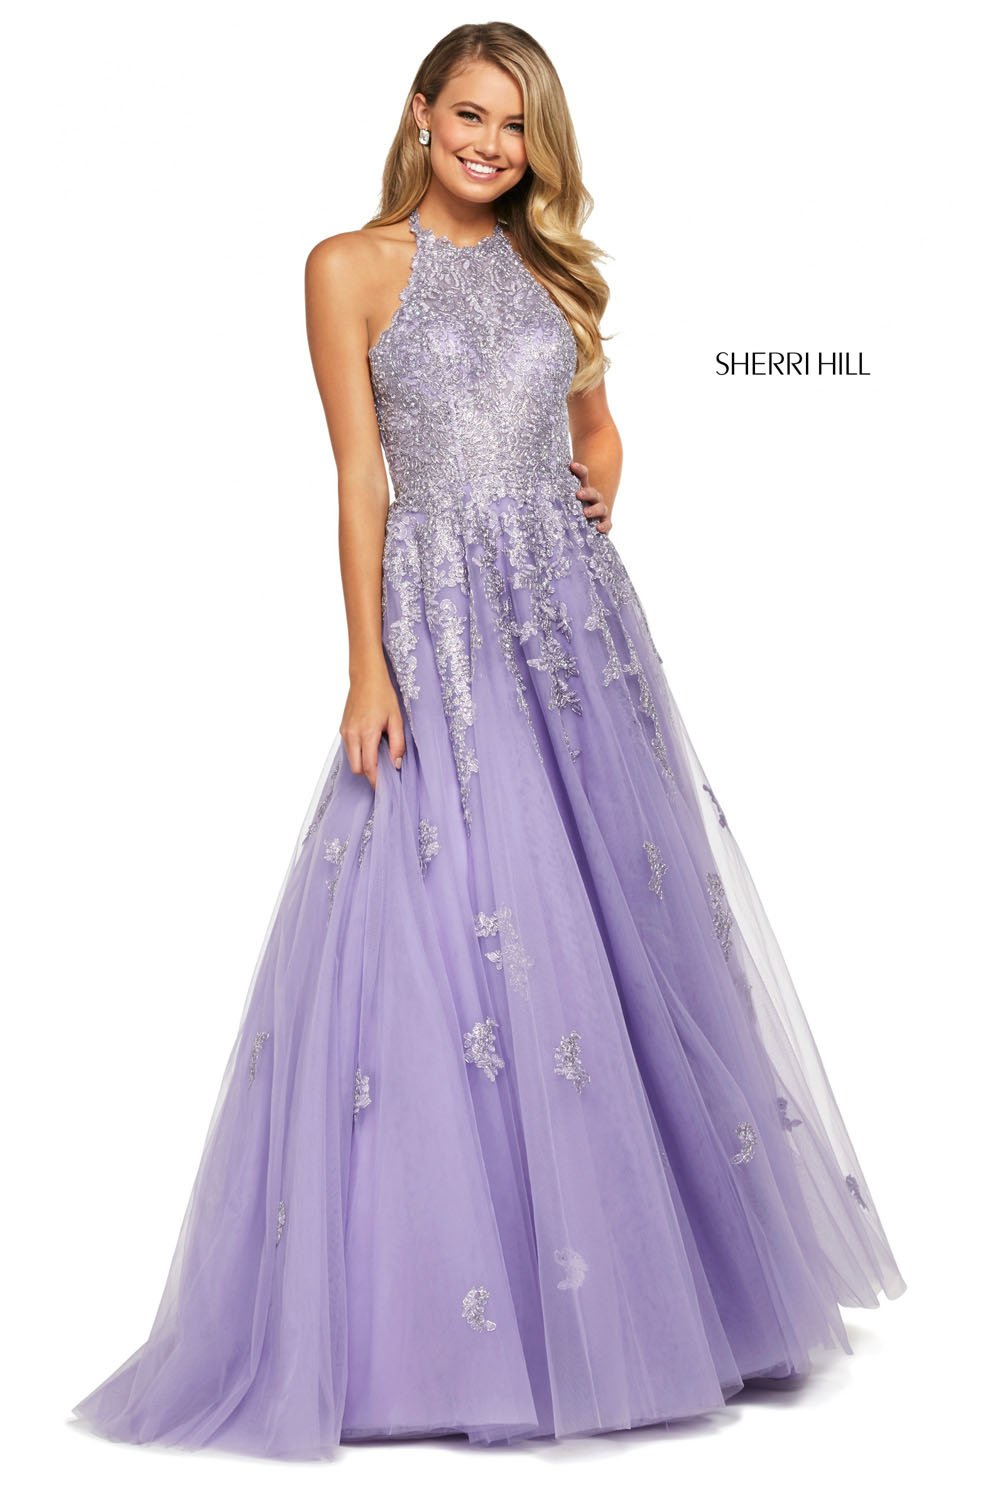 Sherri Hill 53482 dress images in these colors: Navy, Black, Ivory, Blush, Rose Gold, Lilac, Light Blue, Wine.